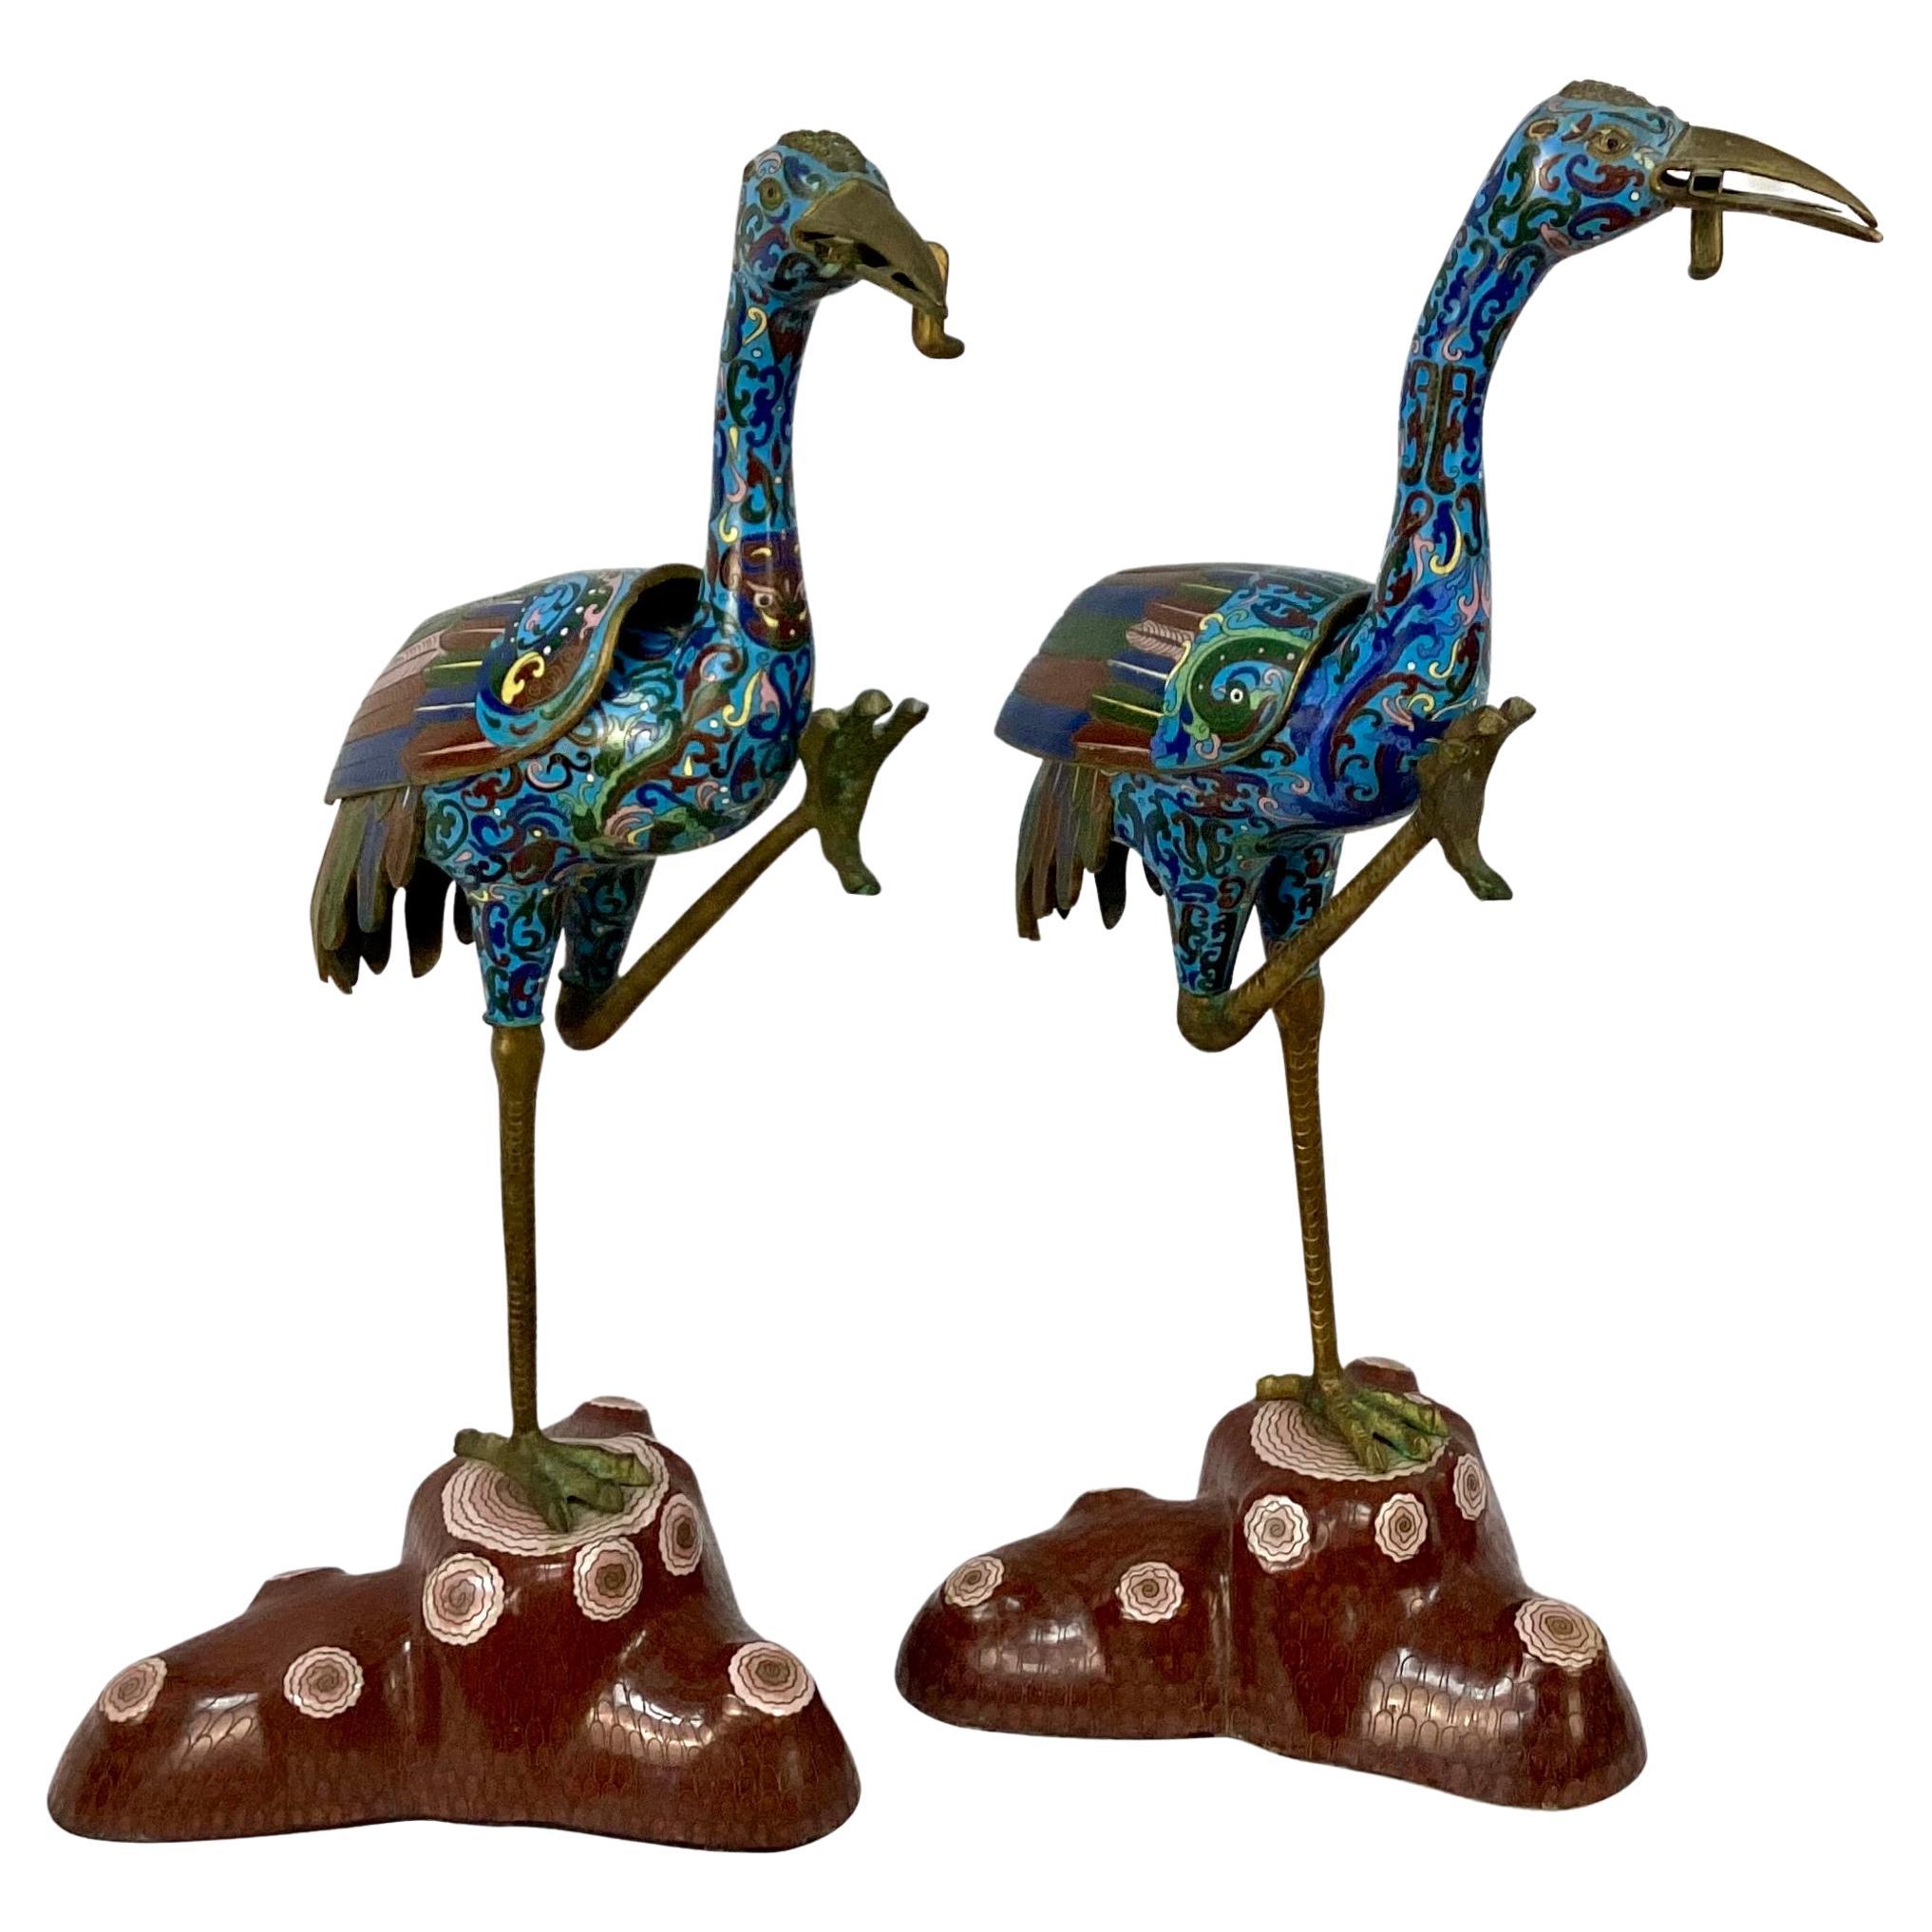 Unique pair of Chinese Cloisonne enamel cranes, possibly from the Qing dynasty. Rich colors of blue, yellow, pink, and green, legs are brass on a pink and brown base. Wings on back are removable to use crane as a censer to burn incense. This elegant